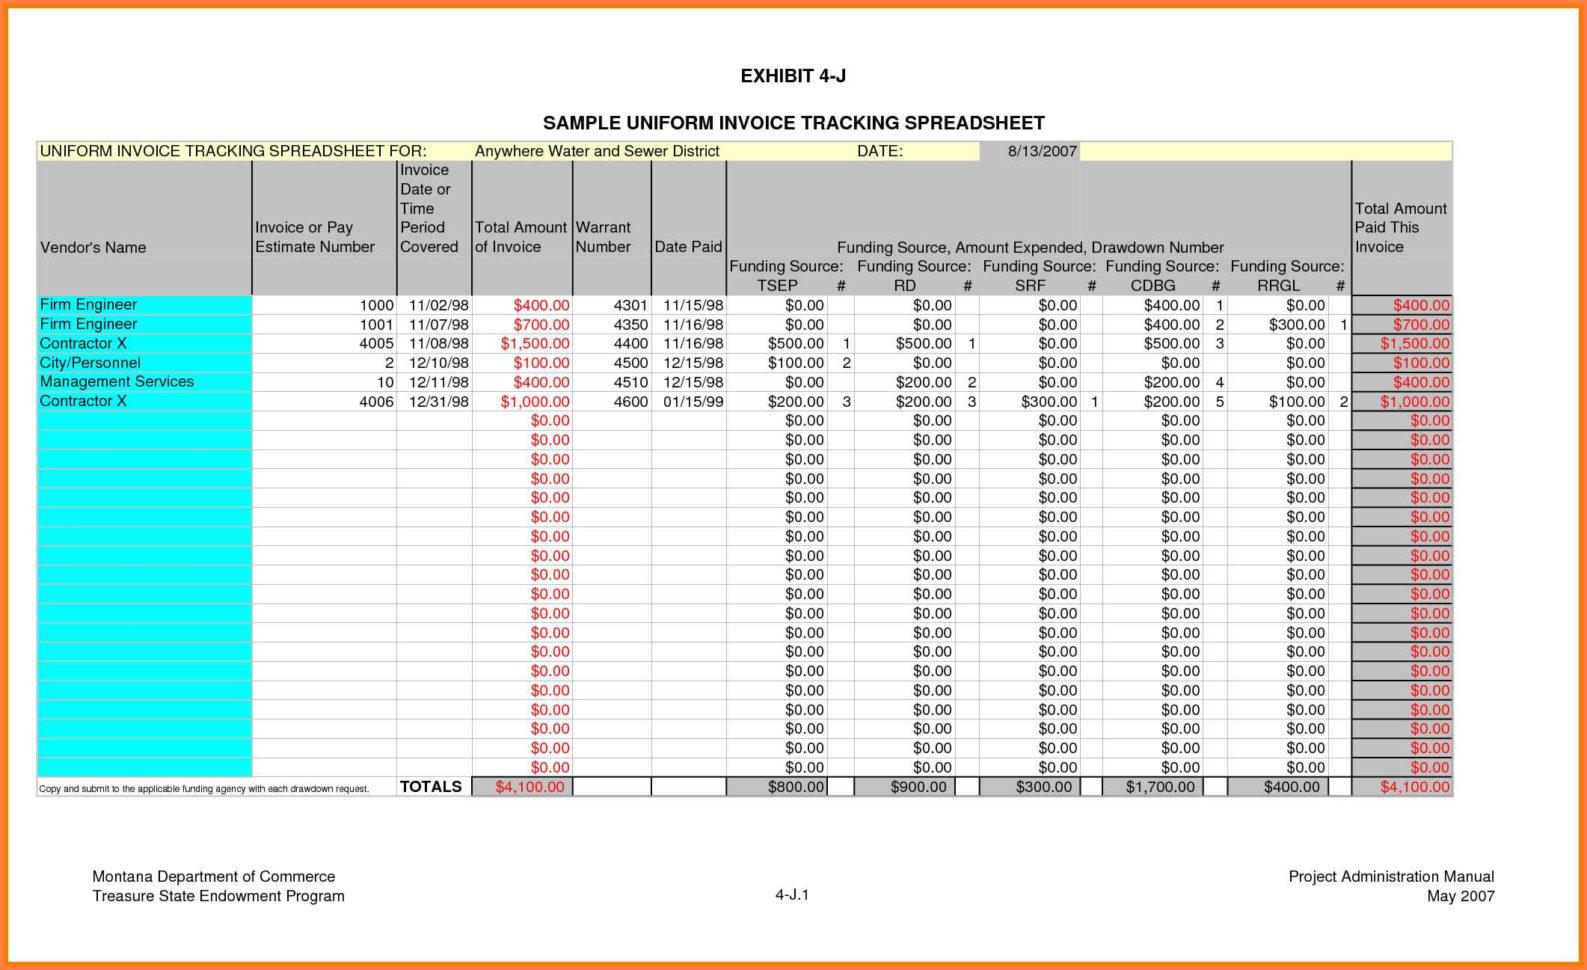 Purchase Order Tracking Excel Spreadsheet for Spreadsheet Example Of